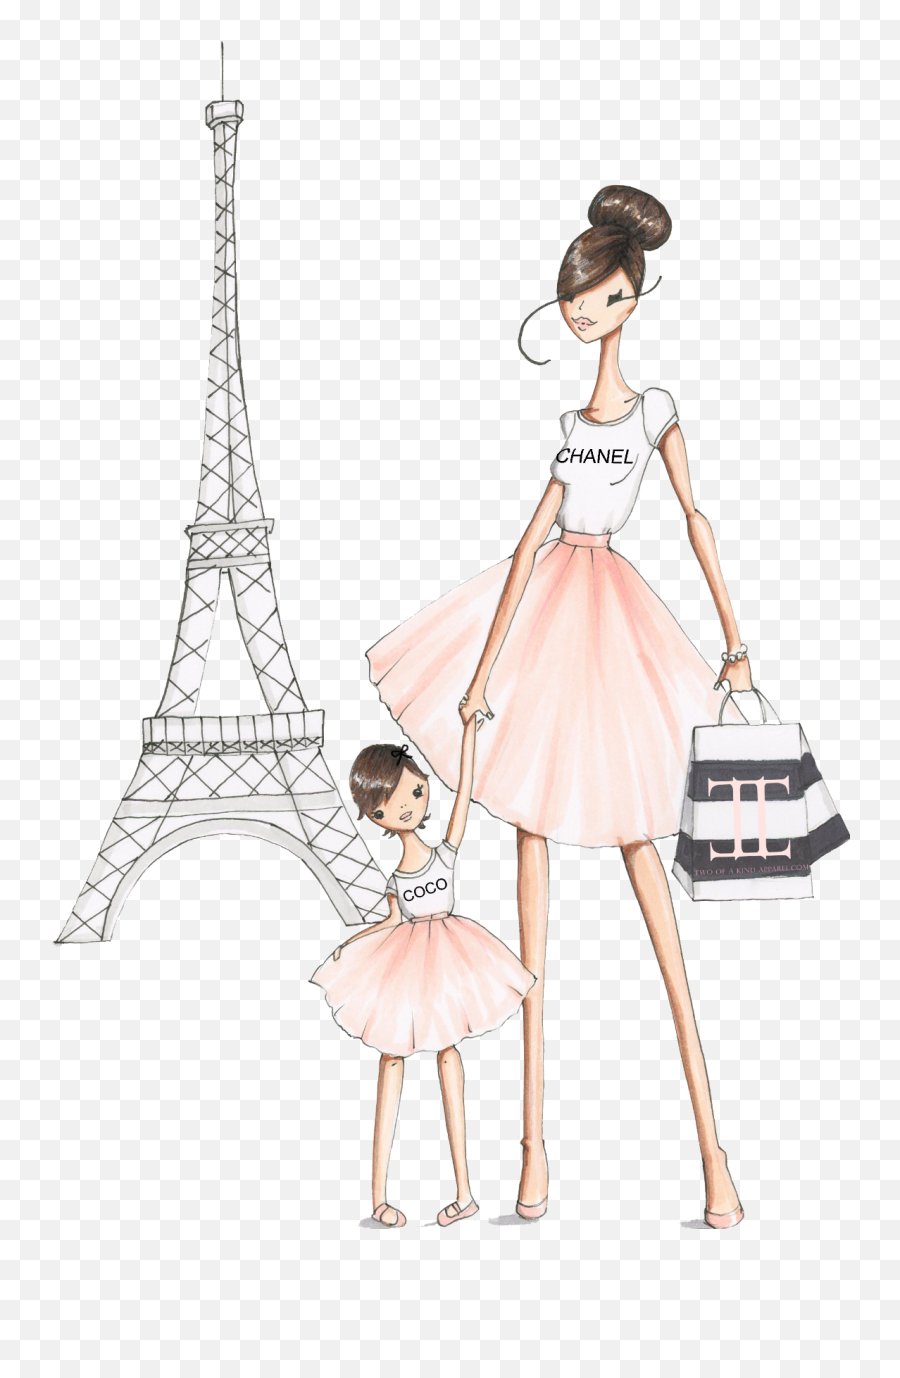 The Most Edited Momanddaughter Picsart - Fashion Doll Emoji,Mom And Daughter Emoji Clear Background